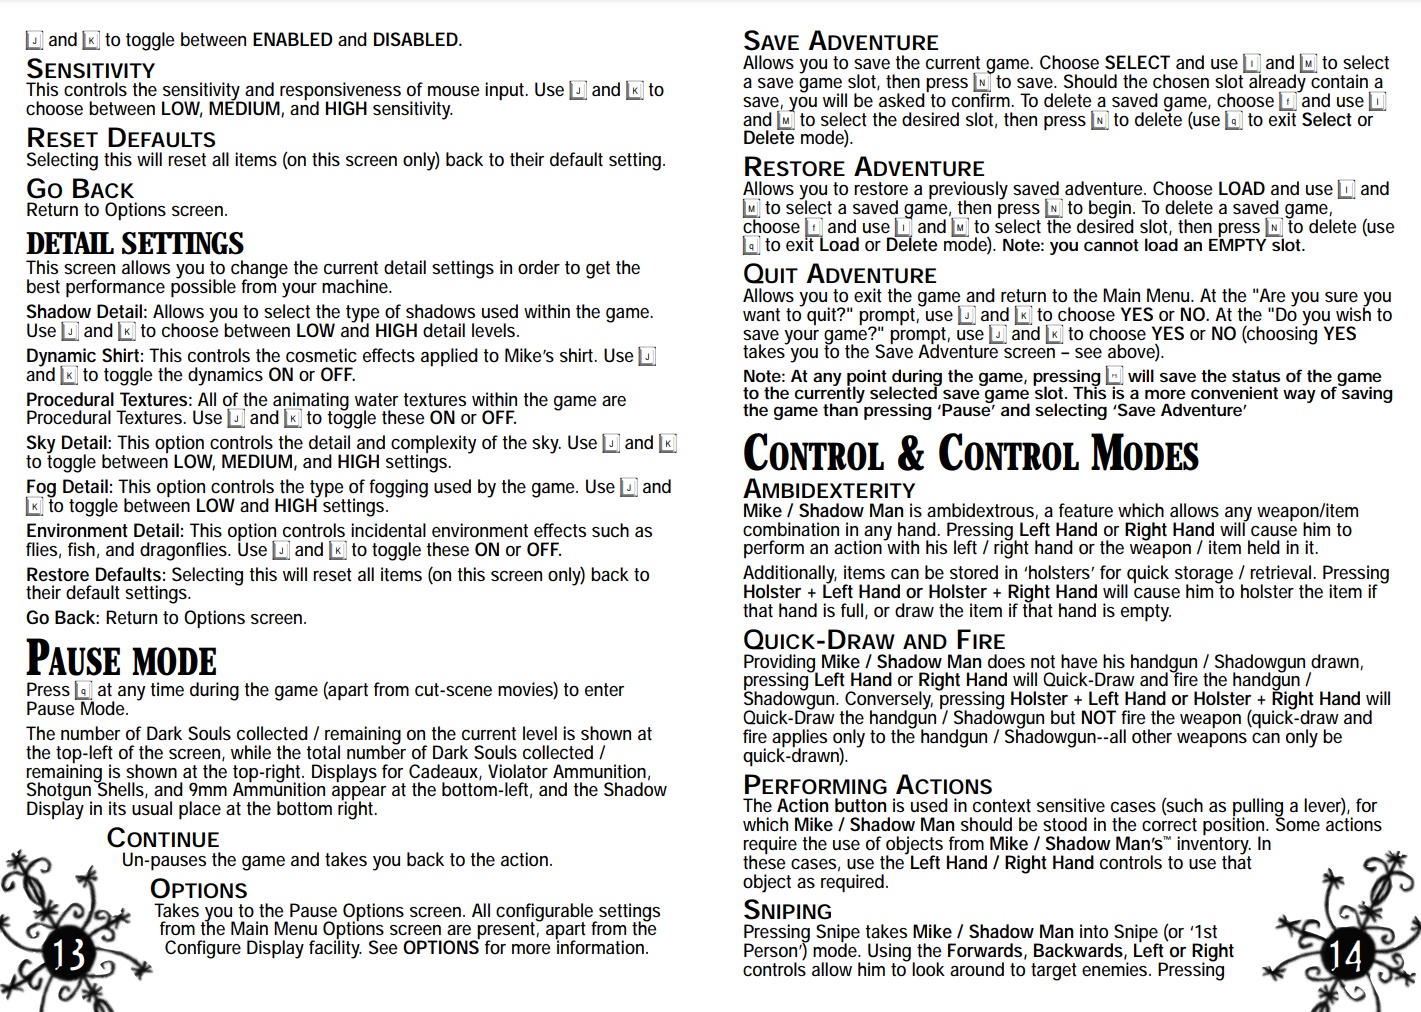 Shadow Man Remastered User's Manual: Classic. - Page Thirteen-Fourteen: